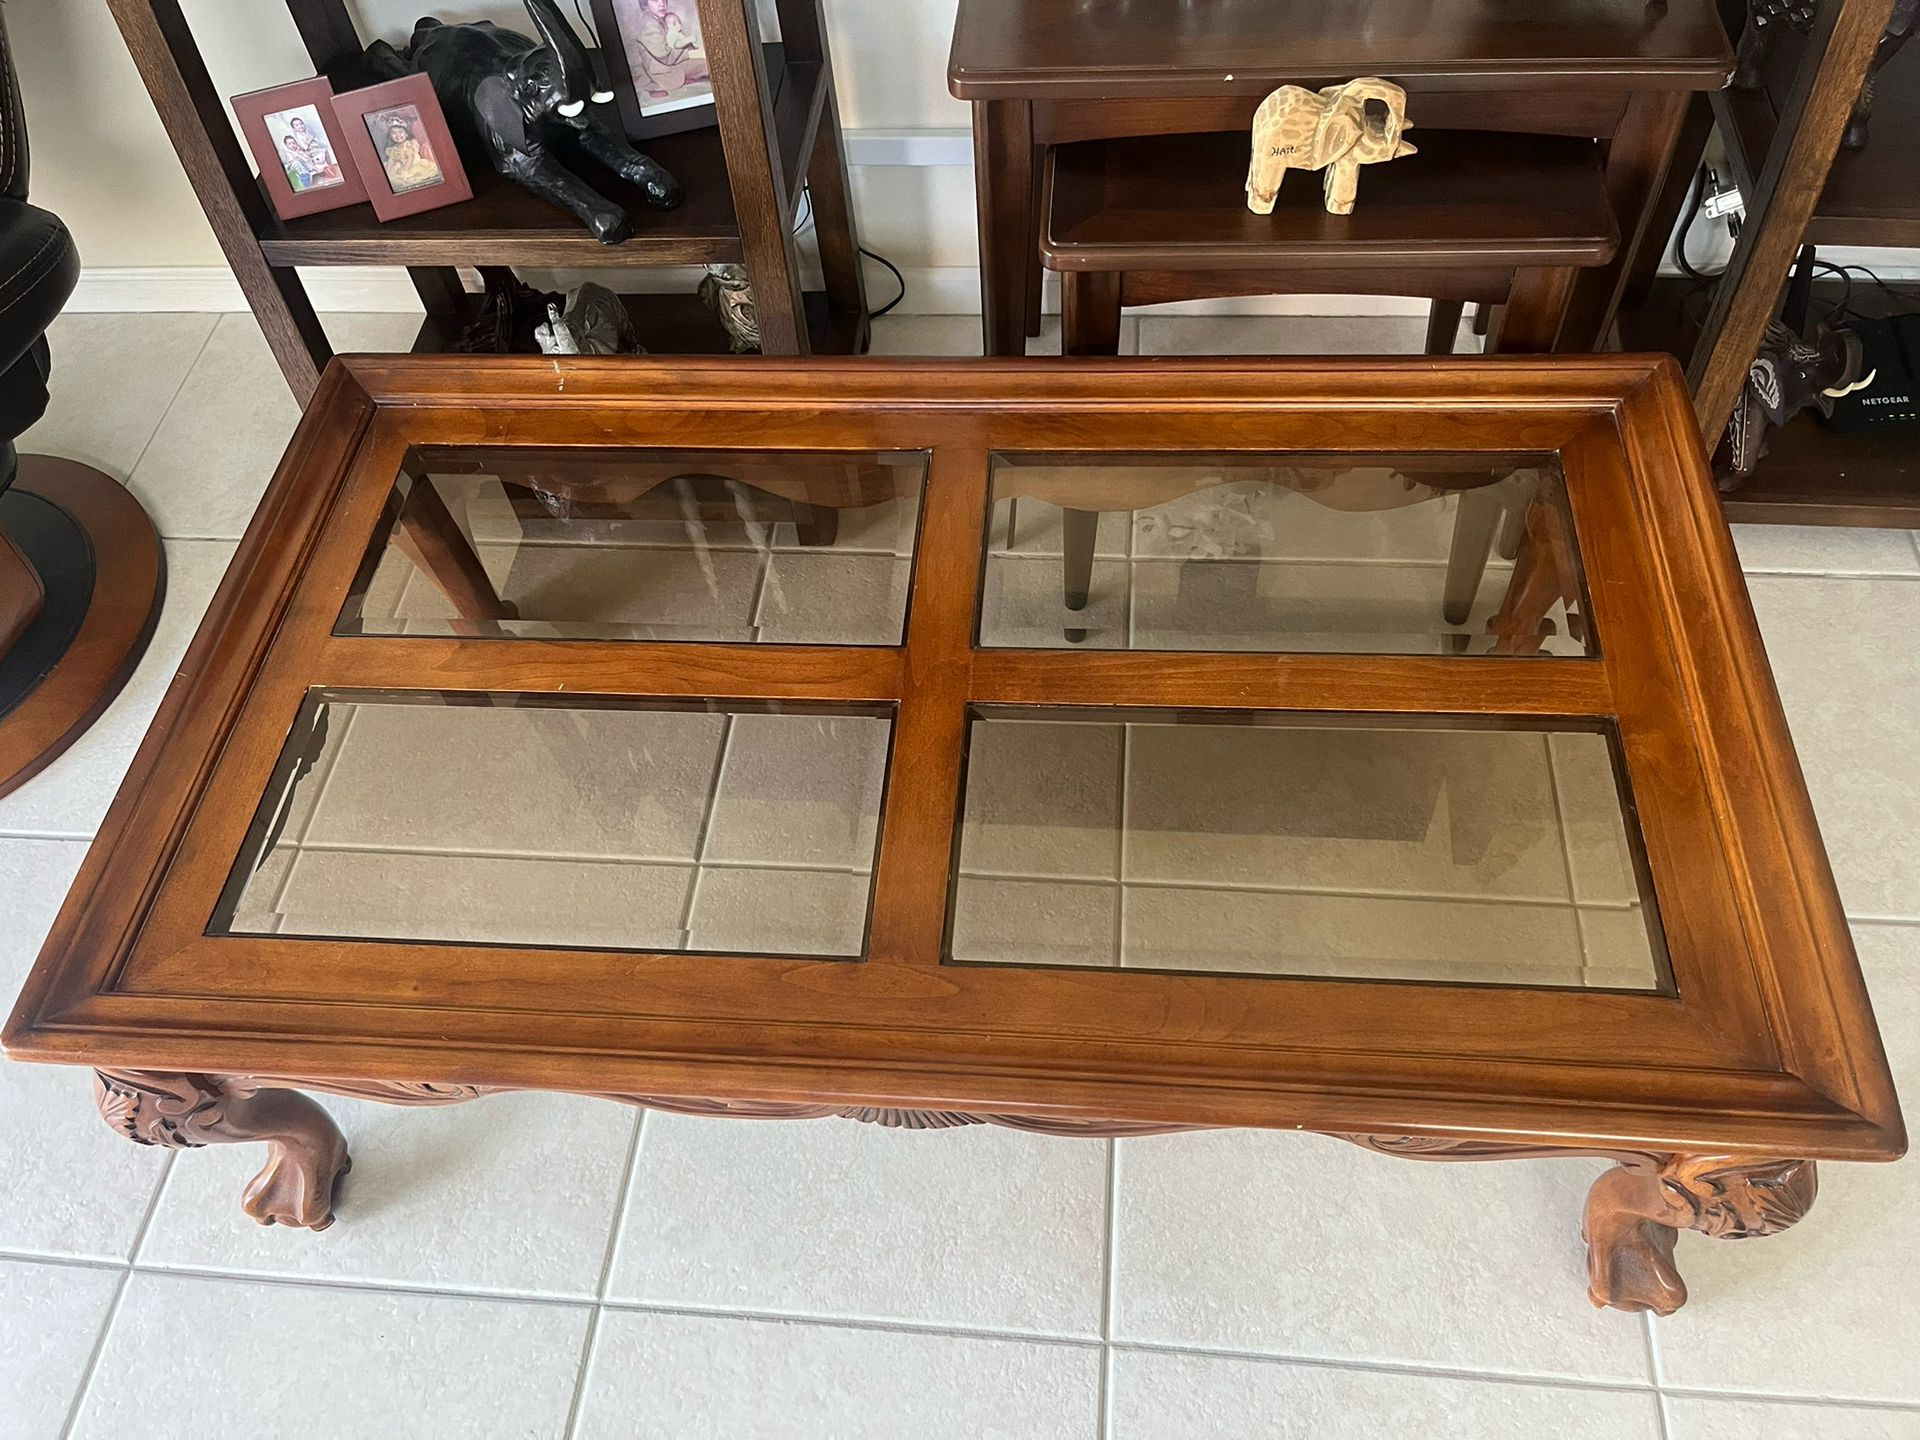 3 Wooden Tables with Glass Top